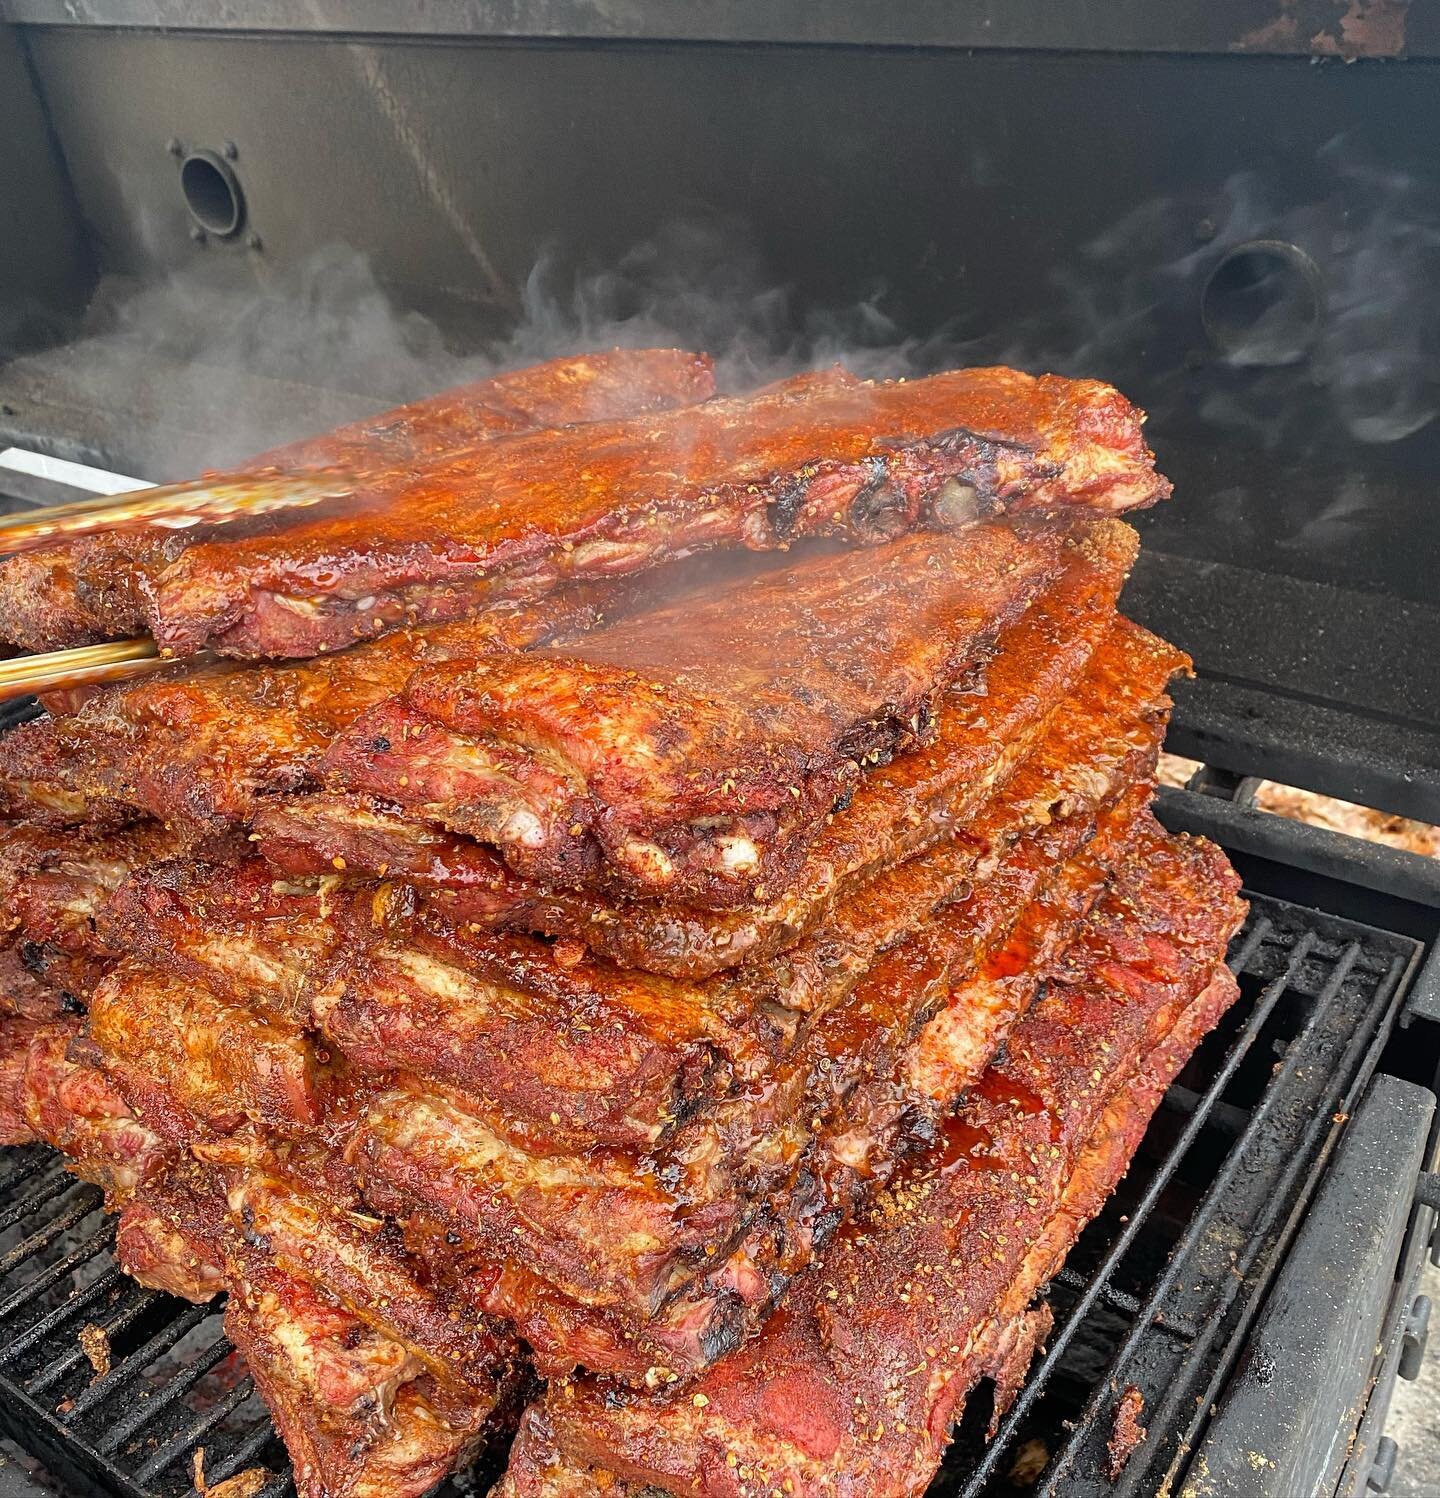 Smoking Hot Ribs! Stacks on stacks! We always barbecue with natural lump charcoal for the best smokey flavor! 
🔥 
#ribs #grill #grilling  #grillingandchilling  #mft #mftcatering #myfamilytradition #charcoal #charcoalgrilling